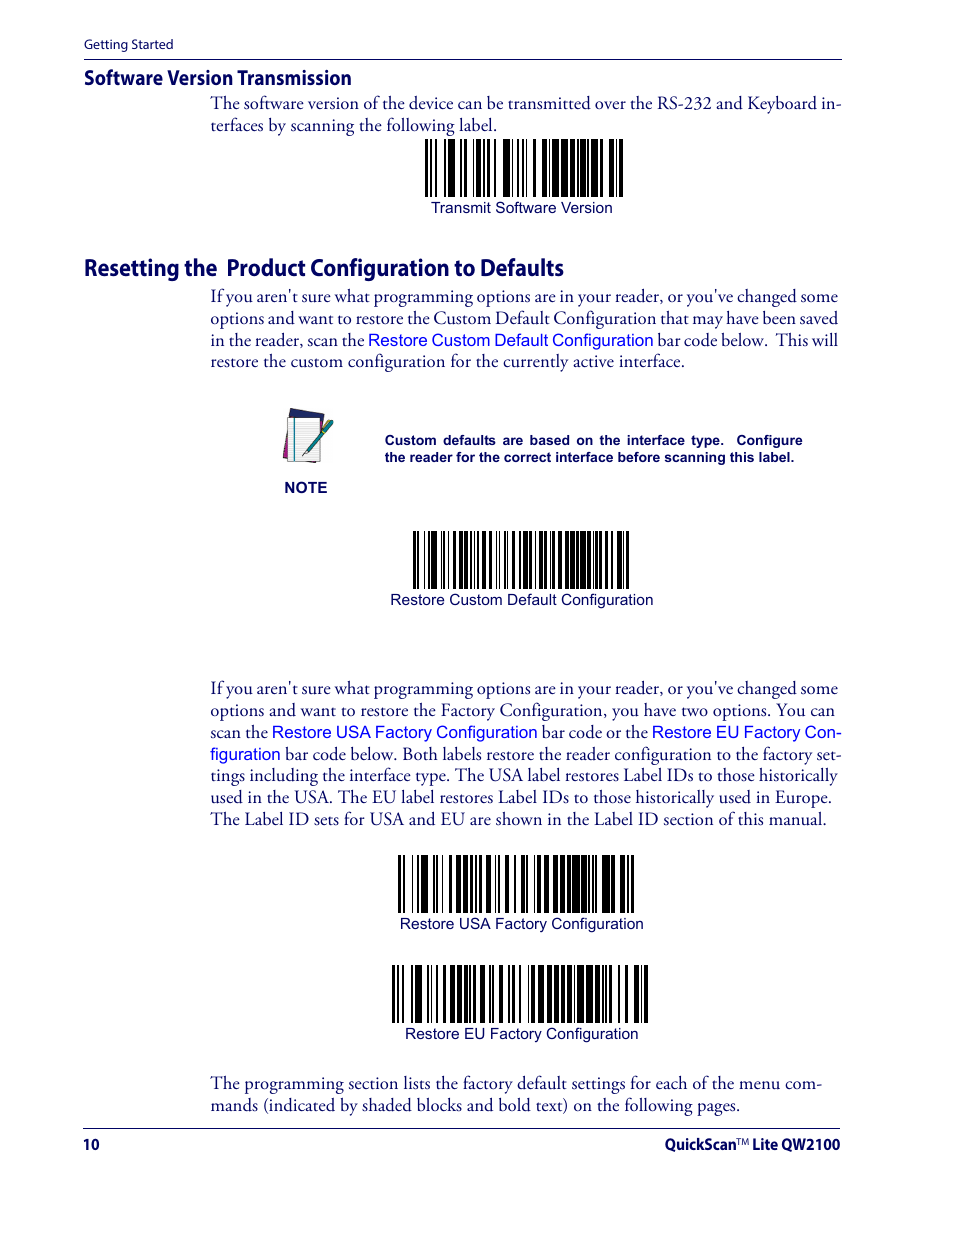 Software version transmission, Resetting the product configuration to  defaults, G bar code labels, like | Datalogic QuickScan Lite QW2100 User  Manual | Page 20 / 324